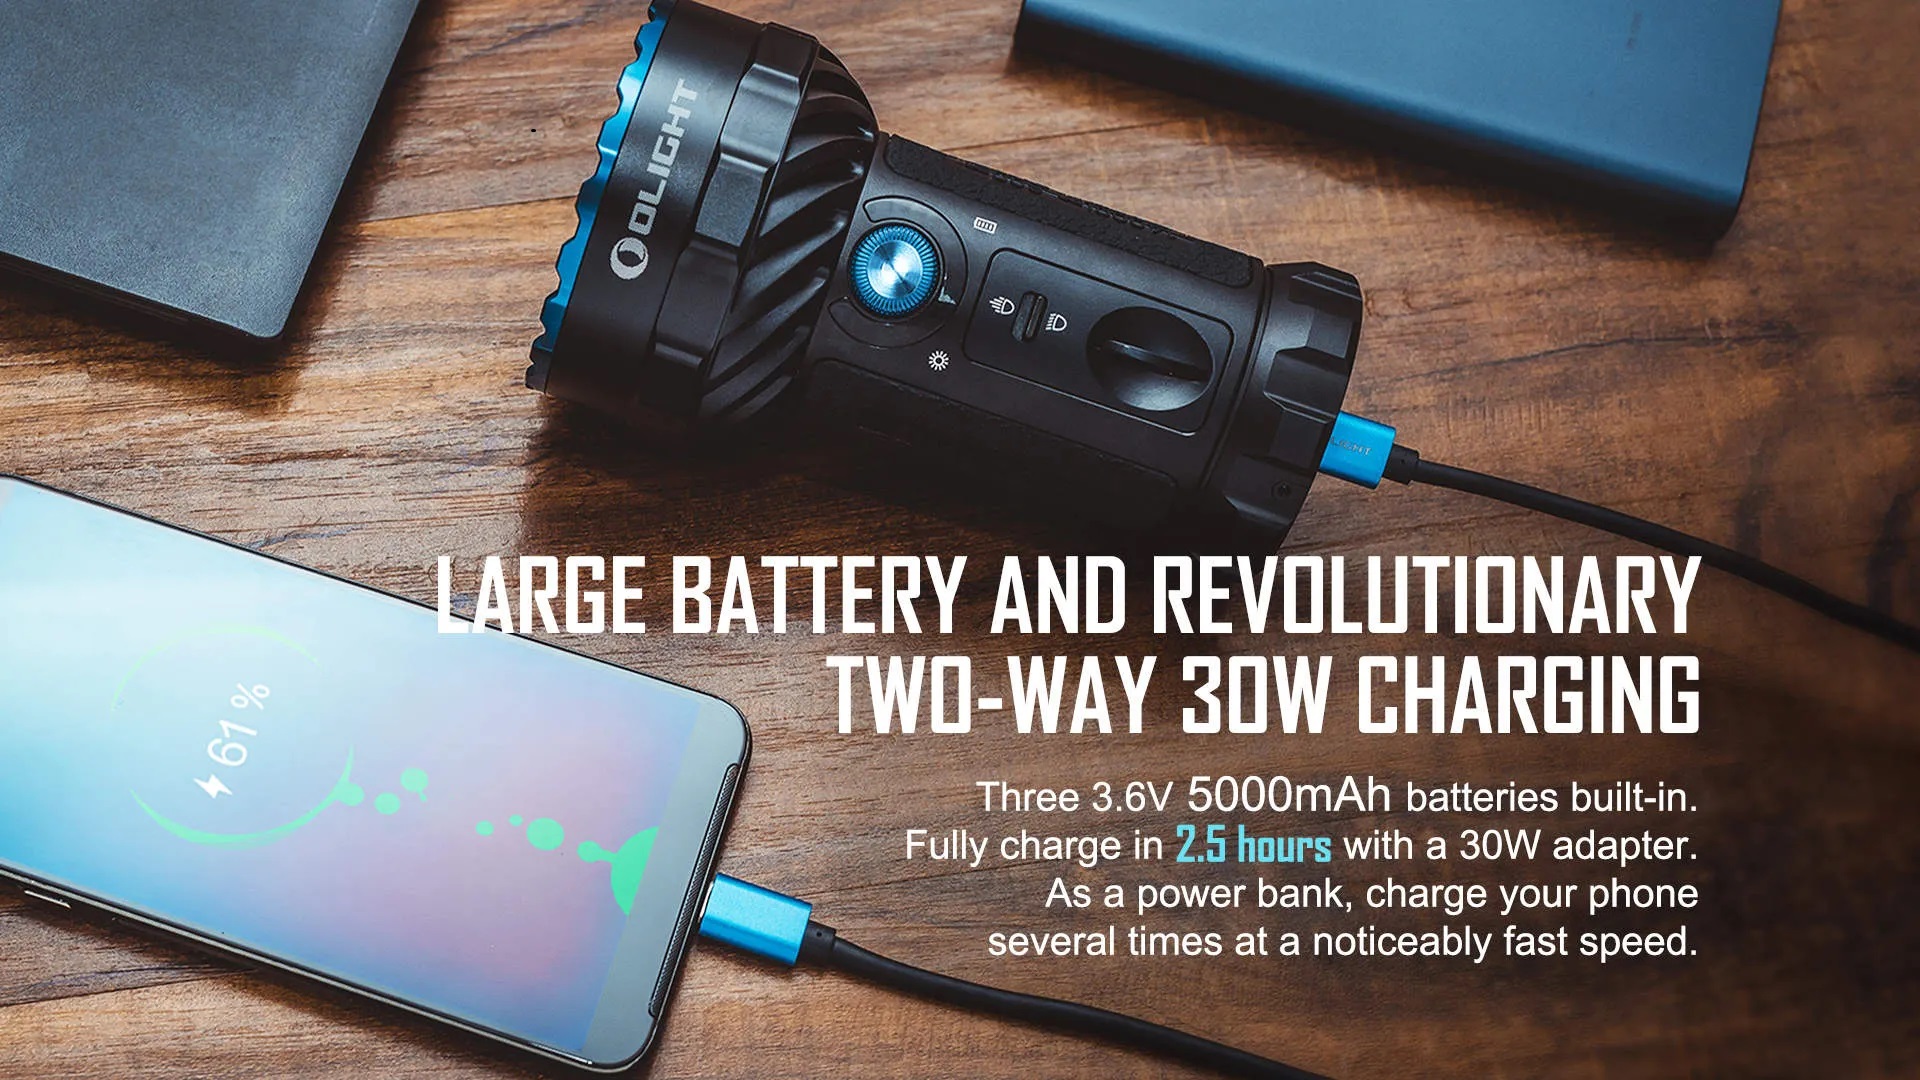 Large Battery and revolutionary two way 30w charging